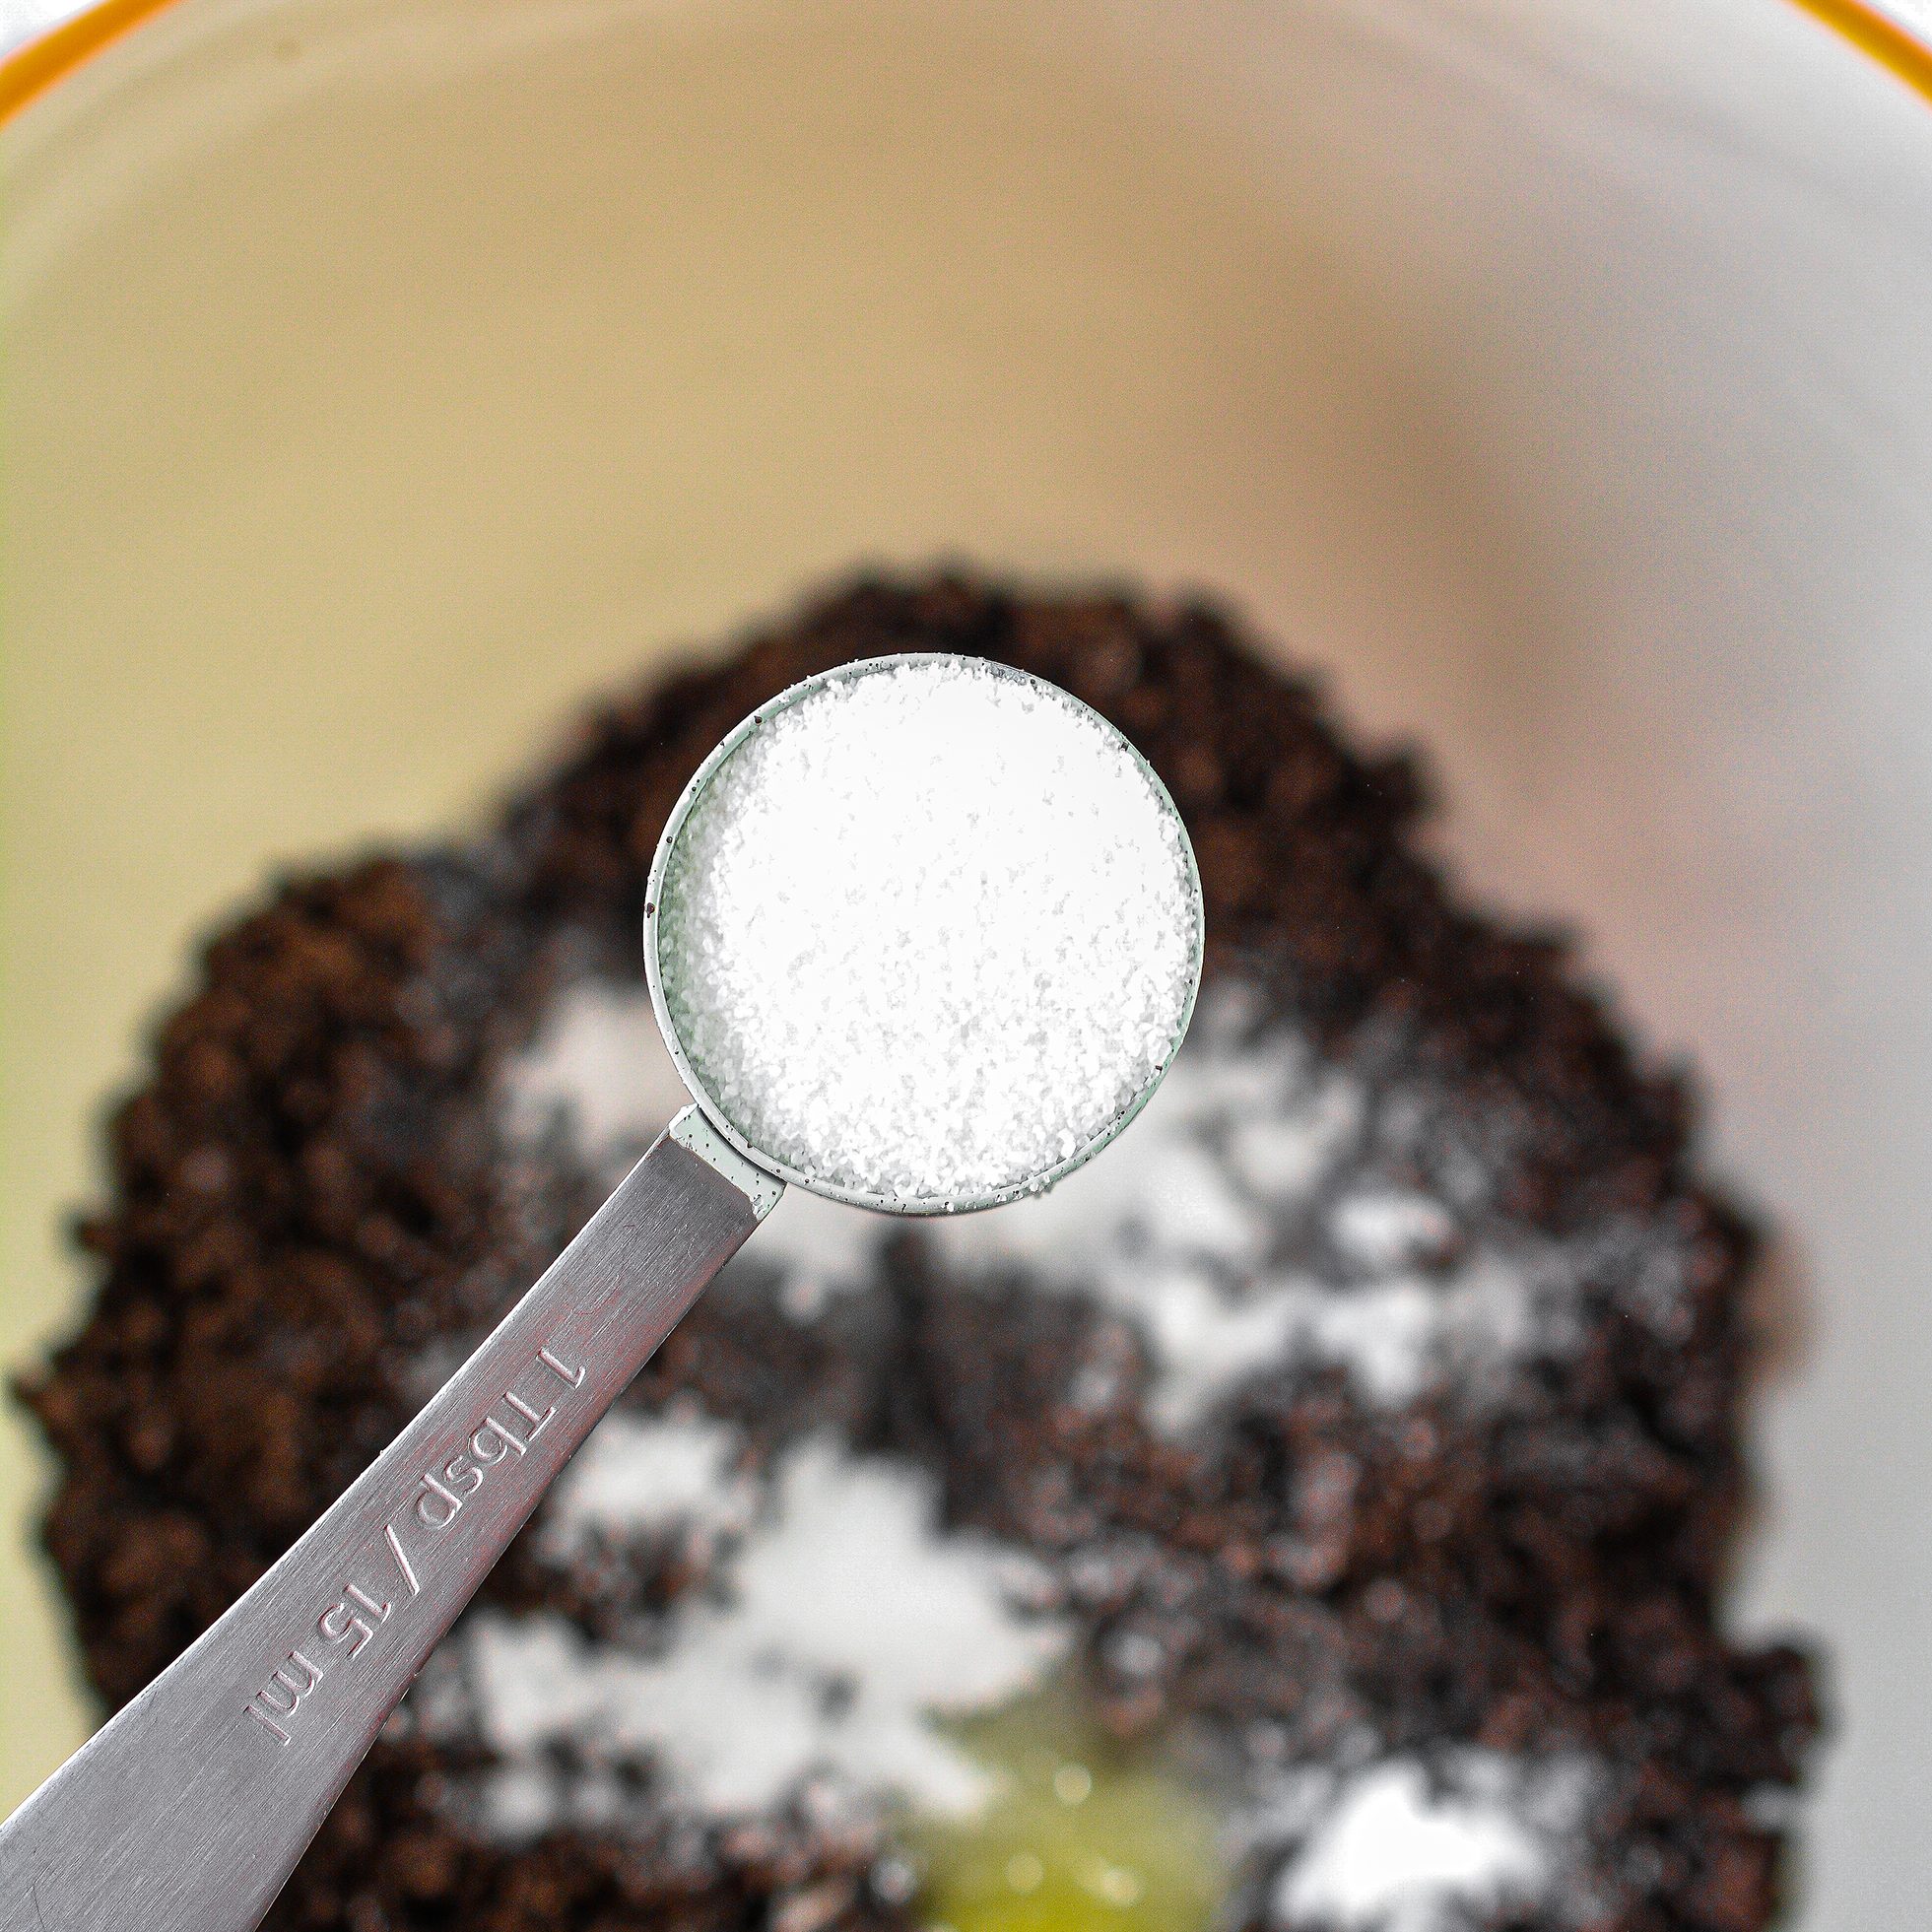 Add the ingredients for the crust to a mixing bowl, and stir until combined well.